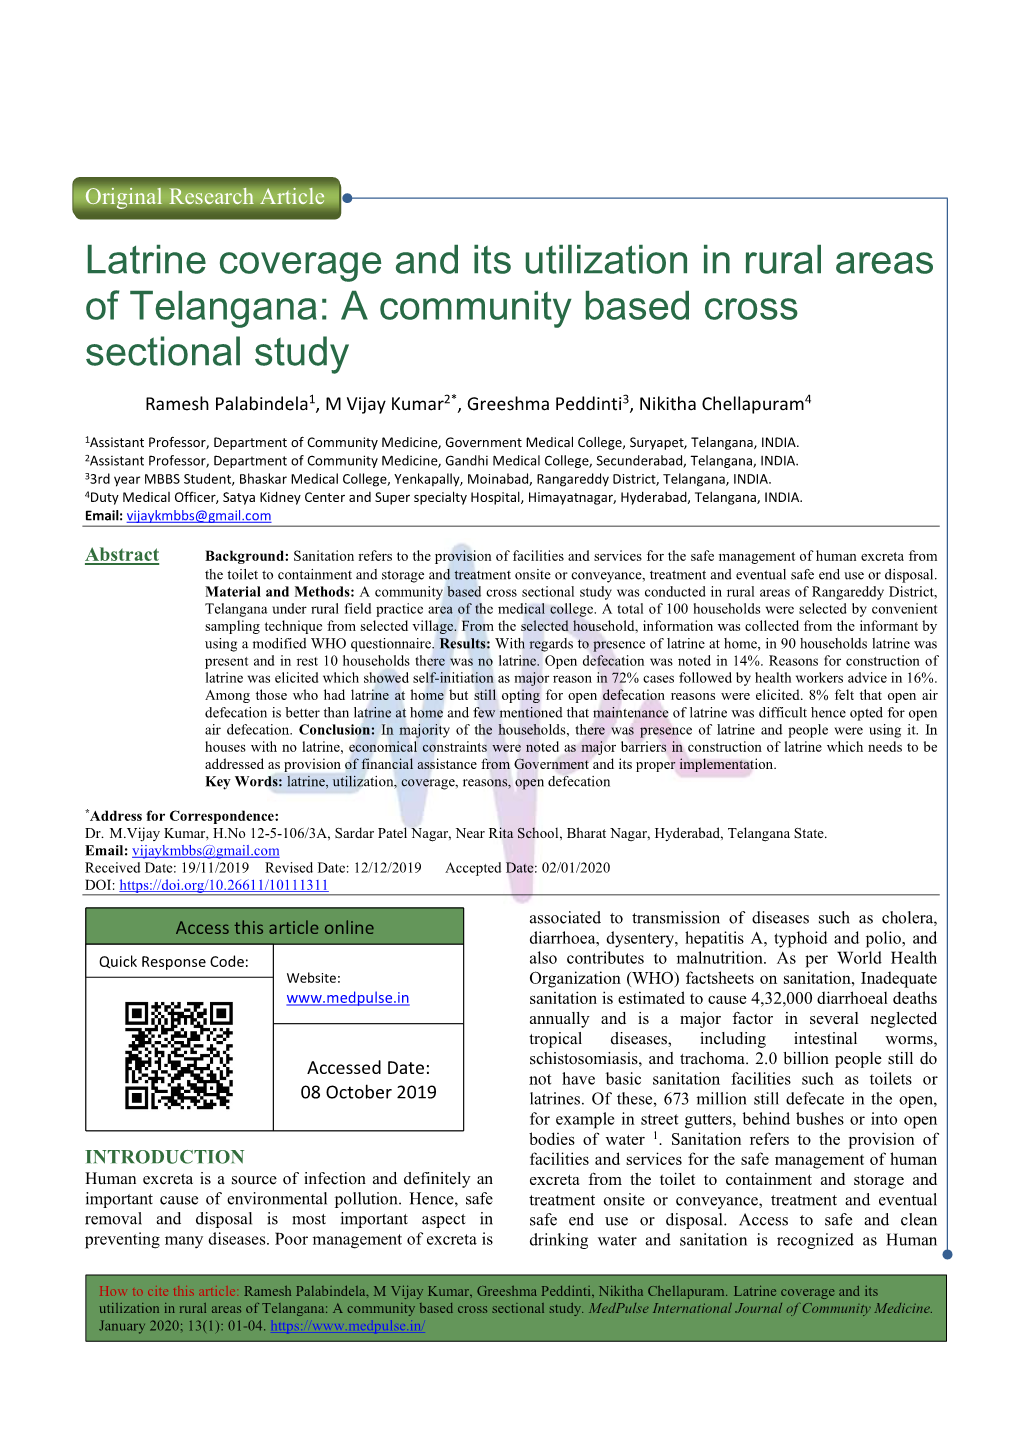 Latrine Coverage and Its Utilization in Rural Areas of Telangana: a Community Based Cross Sectional Study